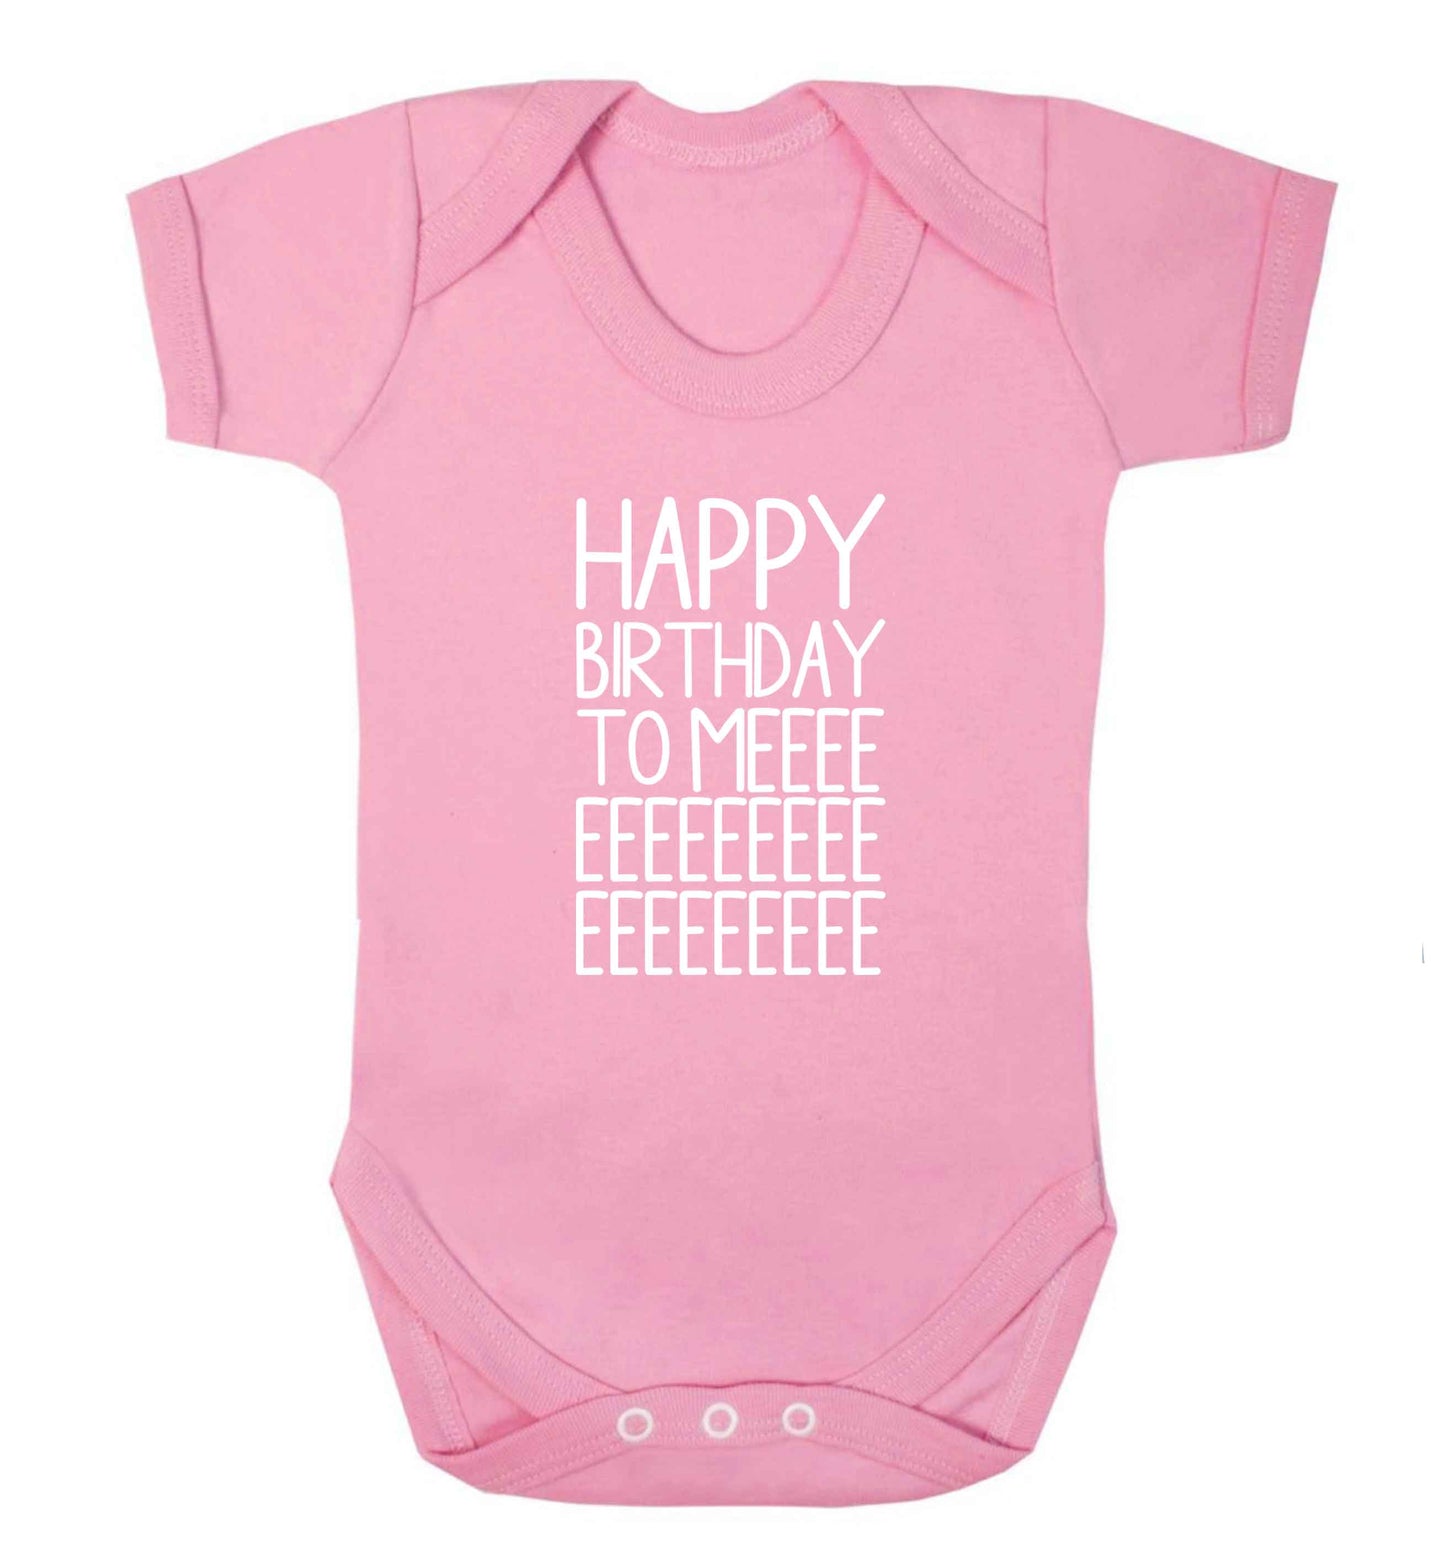 Happy birthday to me baby vest pale pink 18-24 months